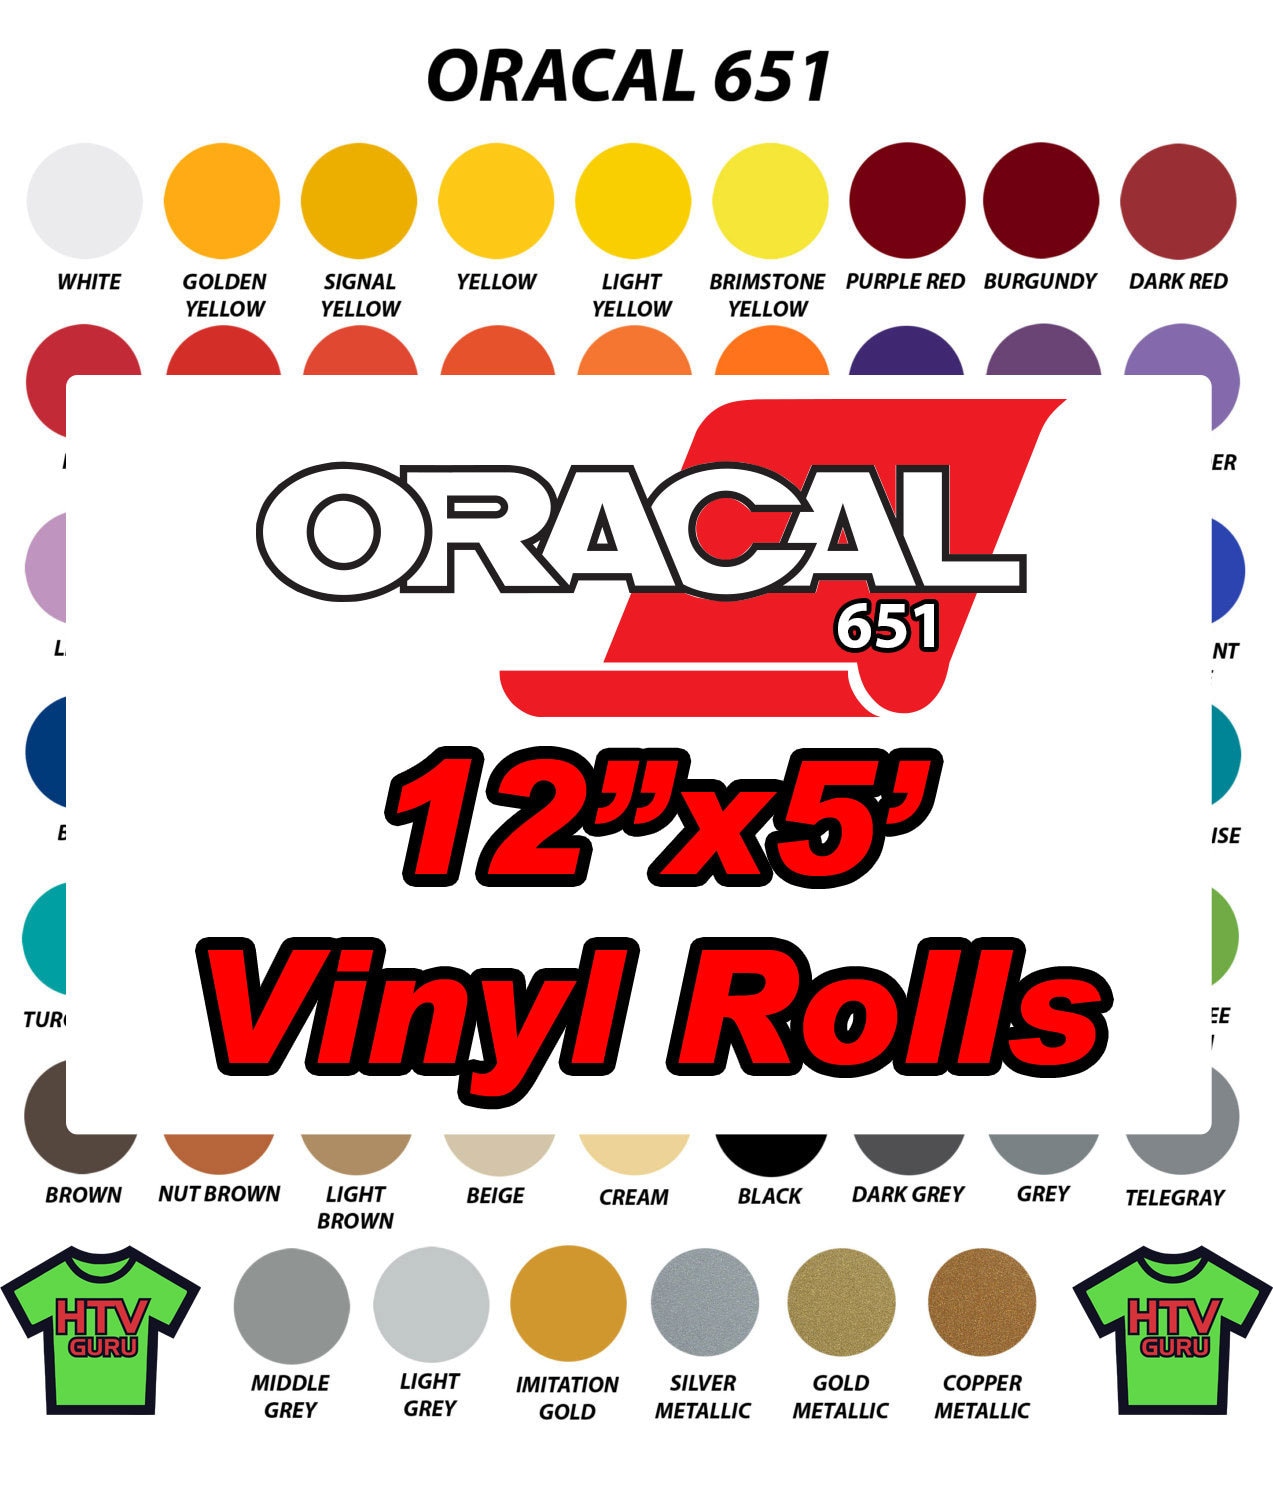 Oracal 651 Permanent Adhesive Craft Vinyl Sheets for Cricut or Silhouette,  10 12x12 Sheets 5 Glossy Black, 5 Glossy White, Free Shipping. 